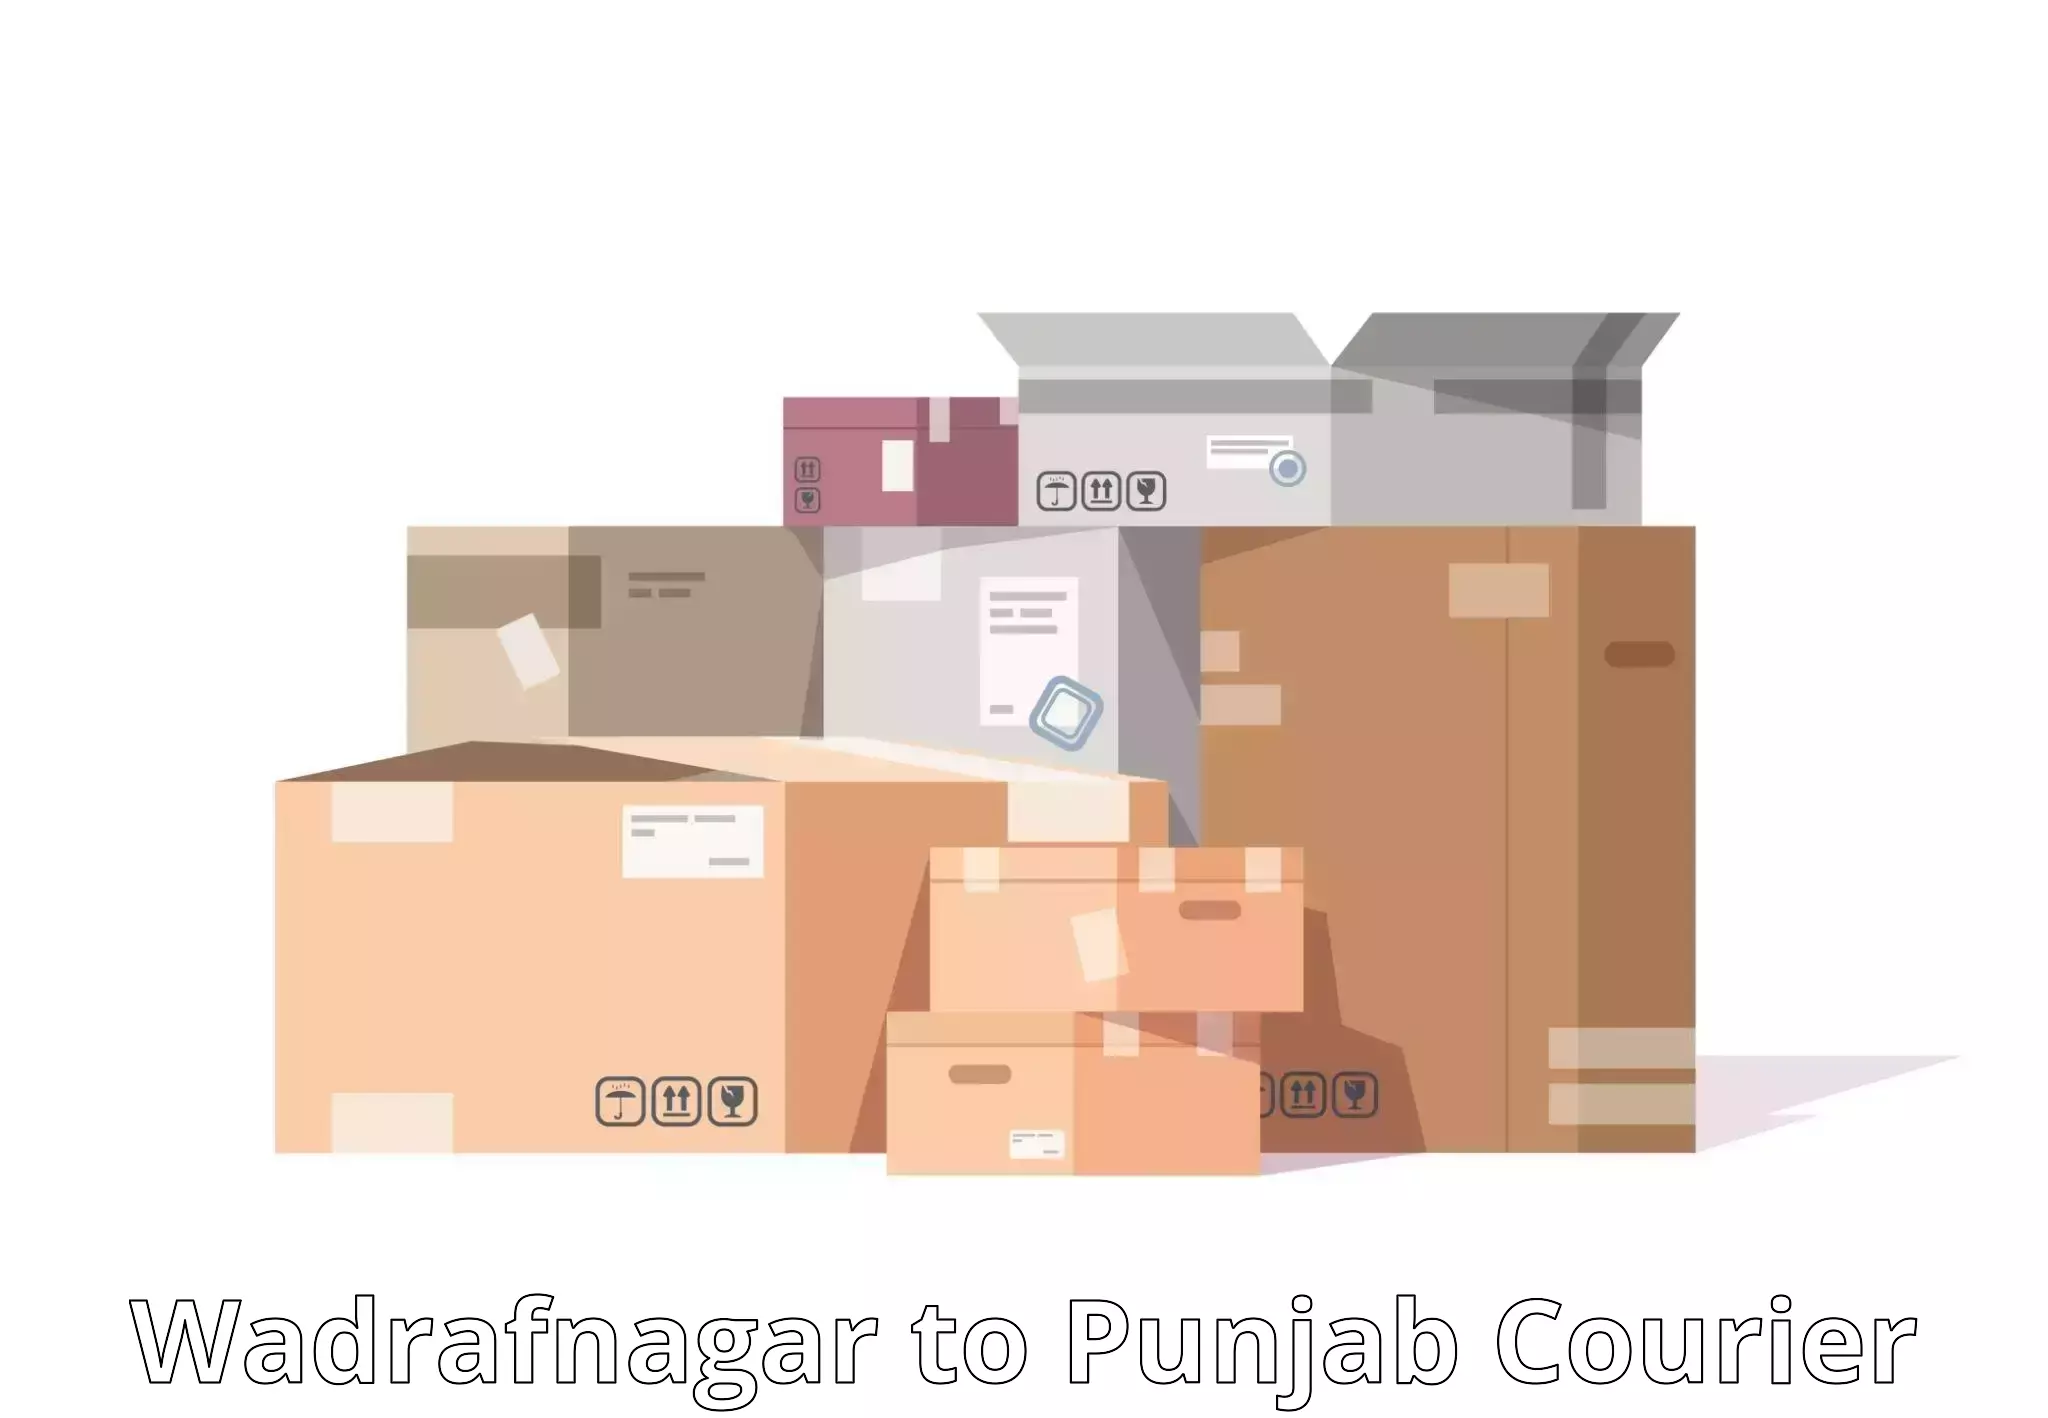 Sustainable courier practices Wadrafnagar to Patiala